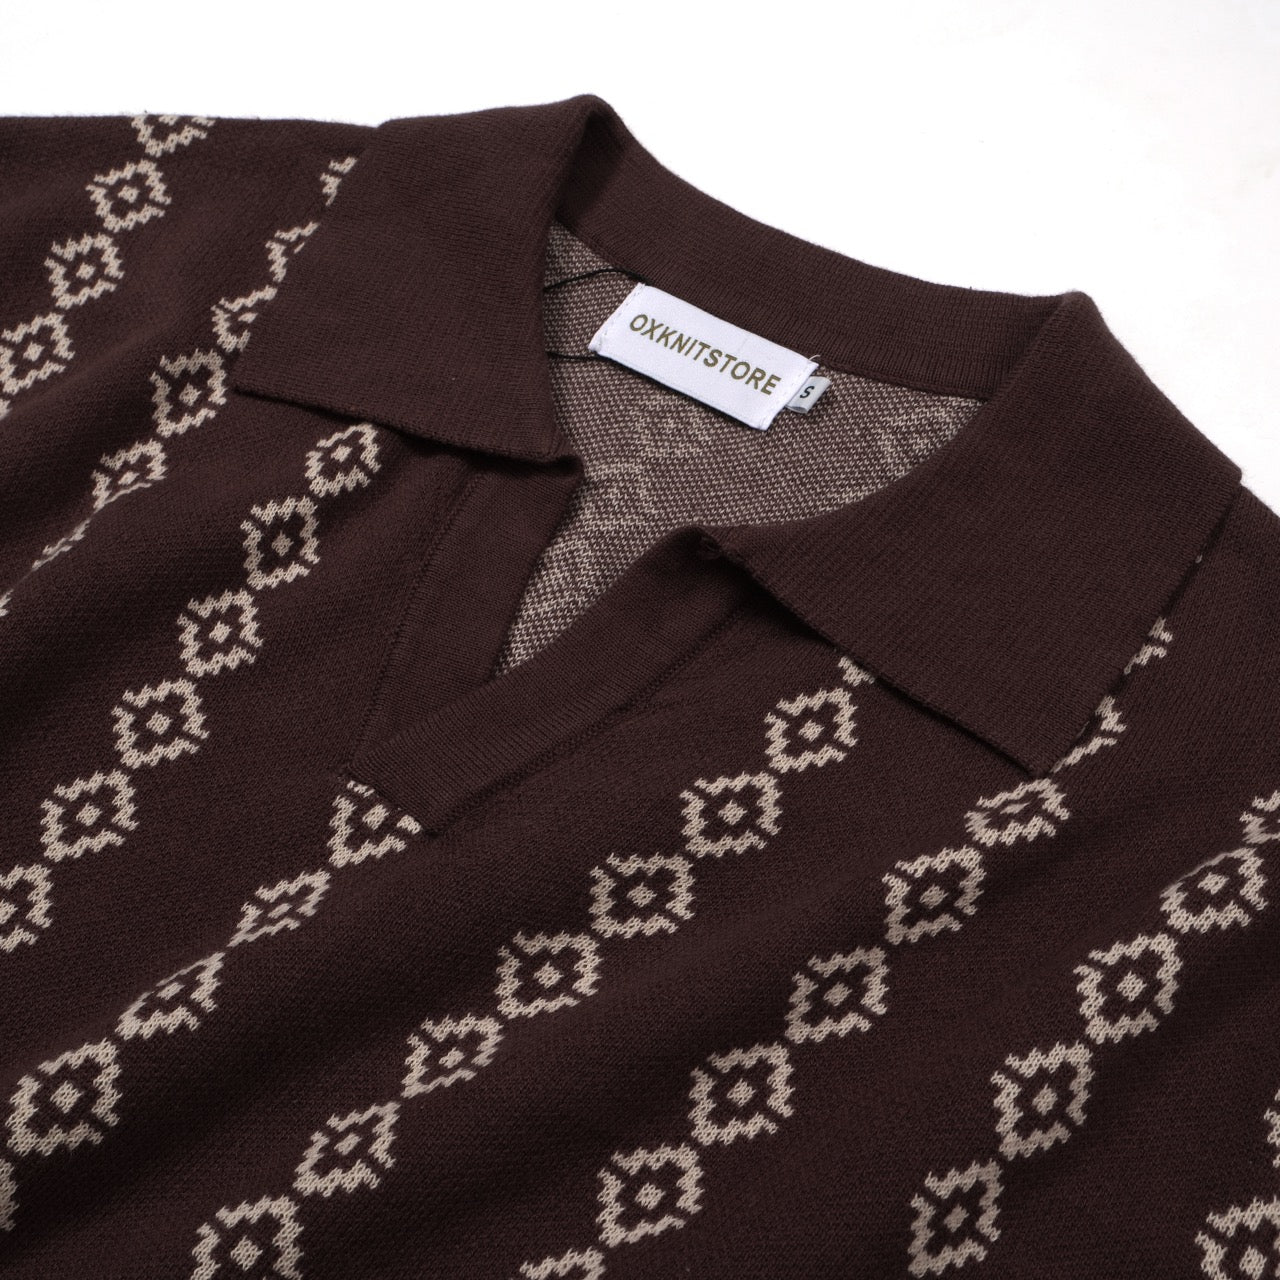 OXKNIT Men Vintage Clothing 1960s Mod Style Casual Deep Brown Knit Retro Polo Shirts